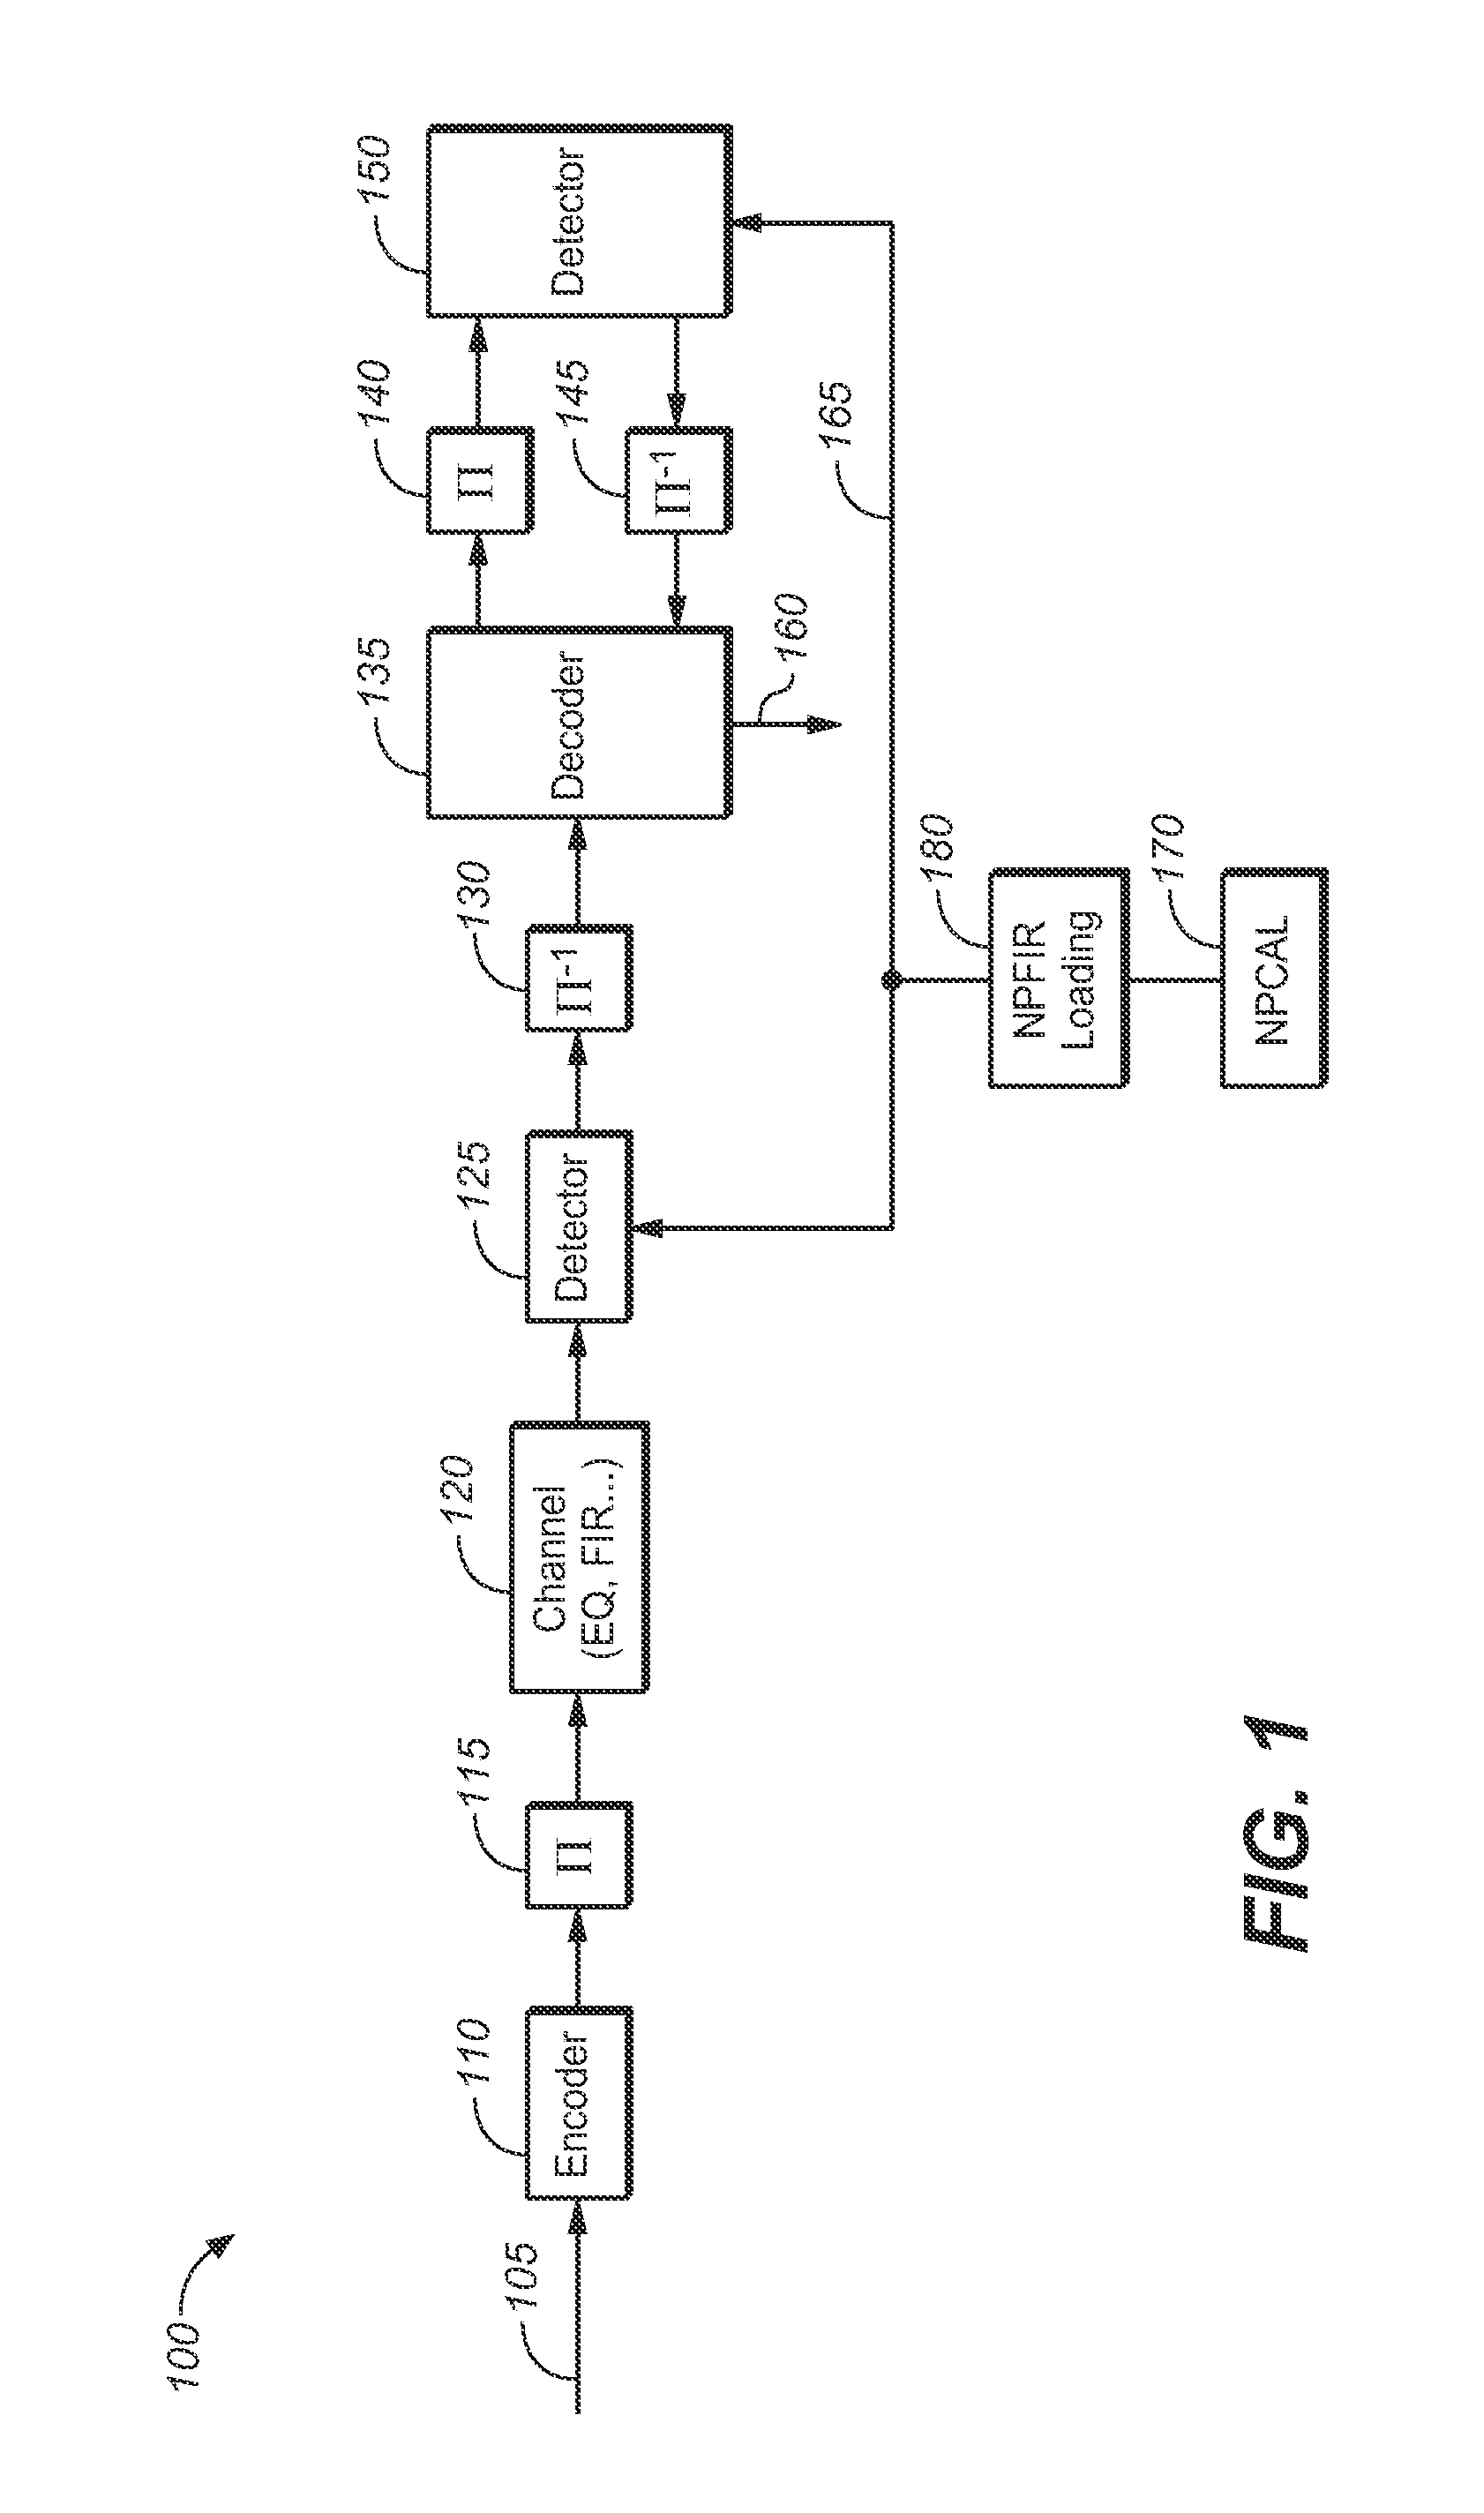 Apparatus and method for breaking trapping sets